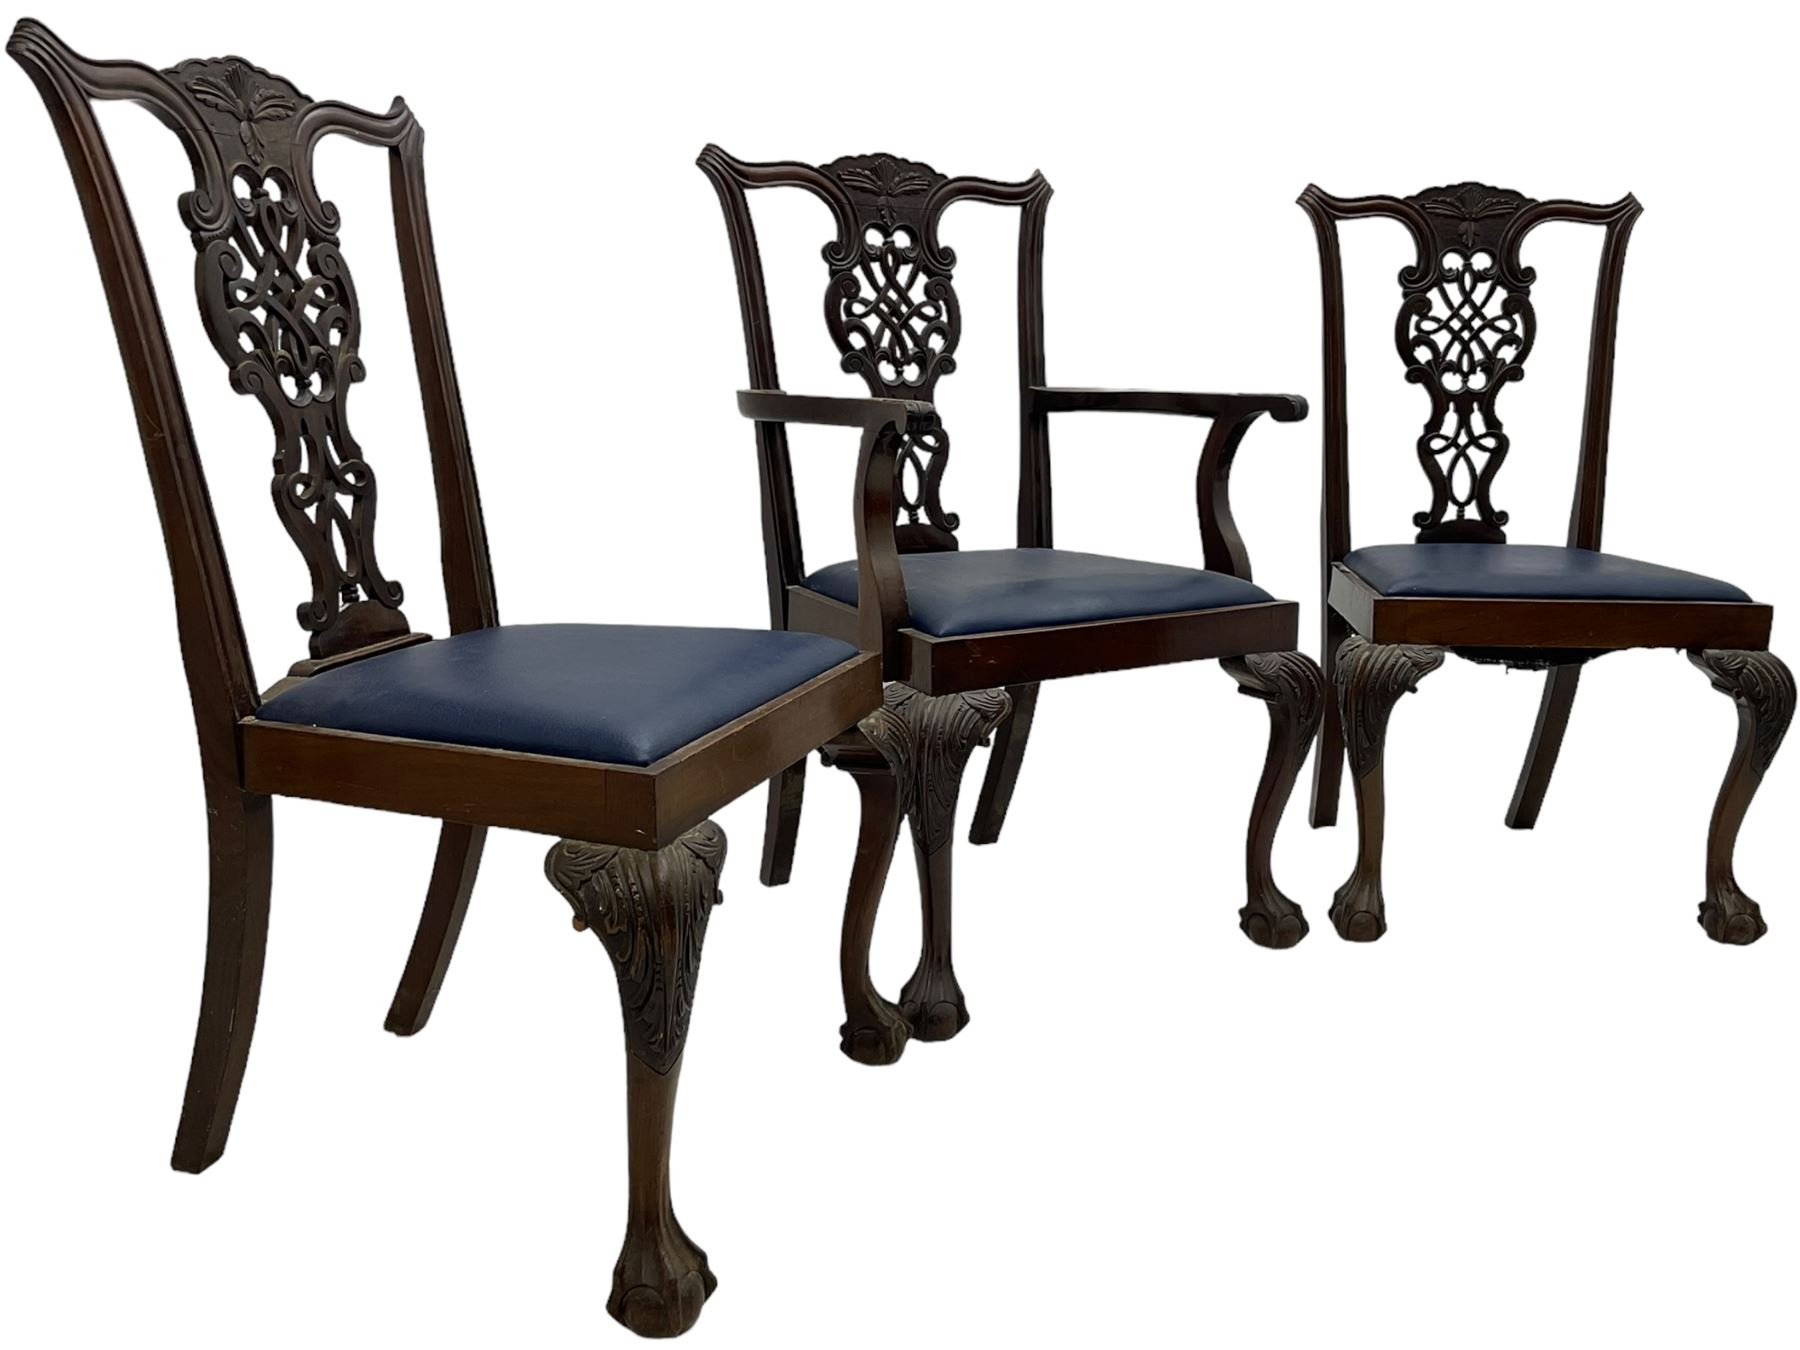 Set of six (5+1) Chippendale design mahogany dining chairs - Image 5 of 8